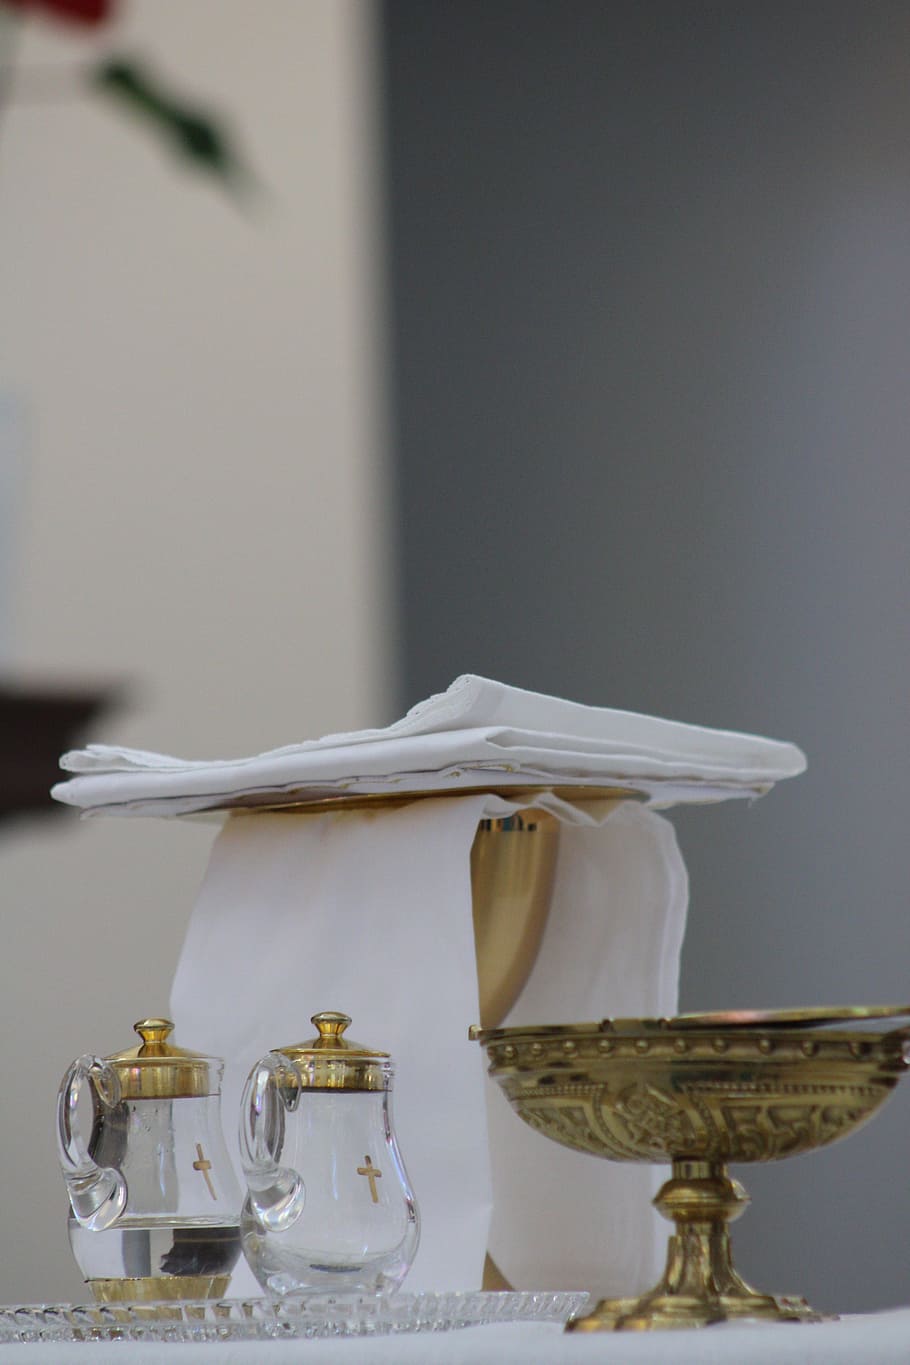 chalice, mass, catholic, detail, table, indoors, plate, household equipment, food and drink, business